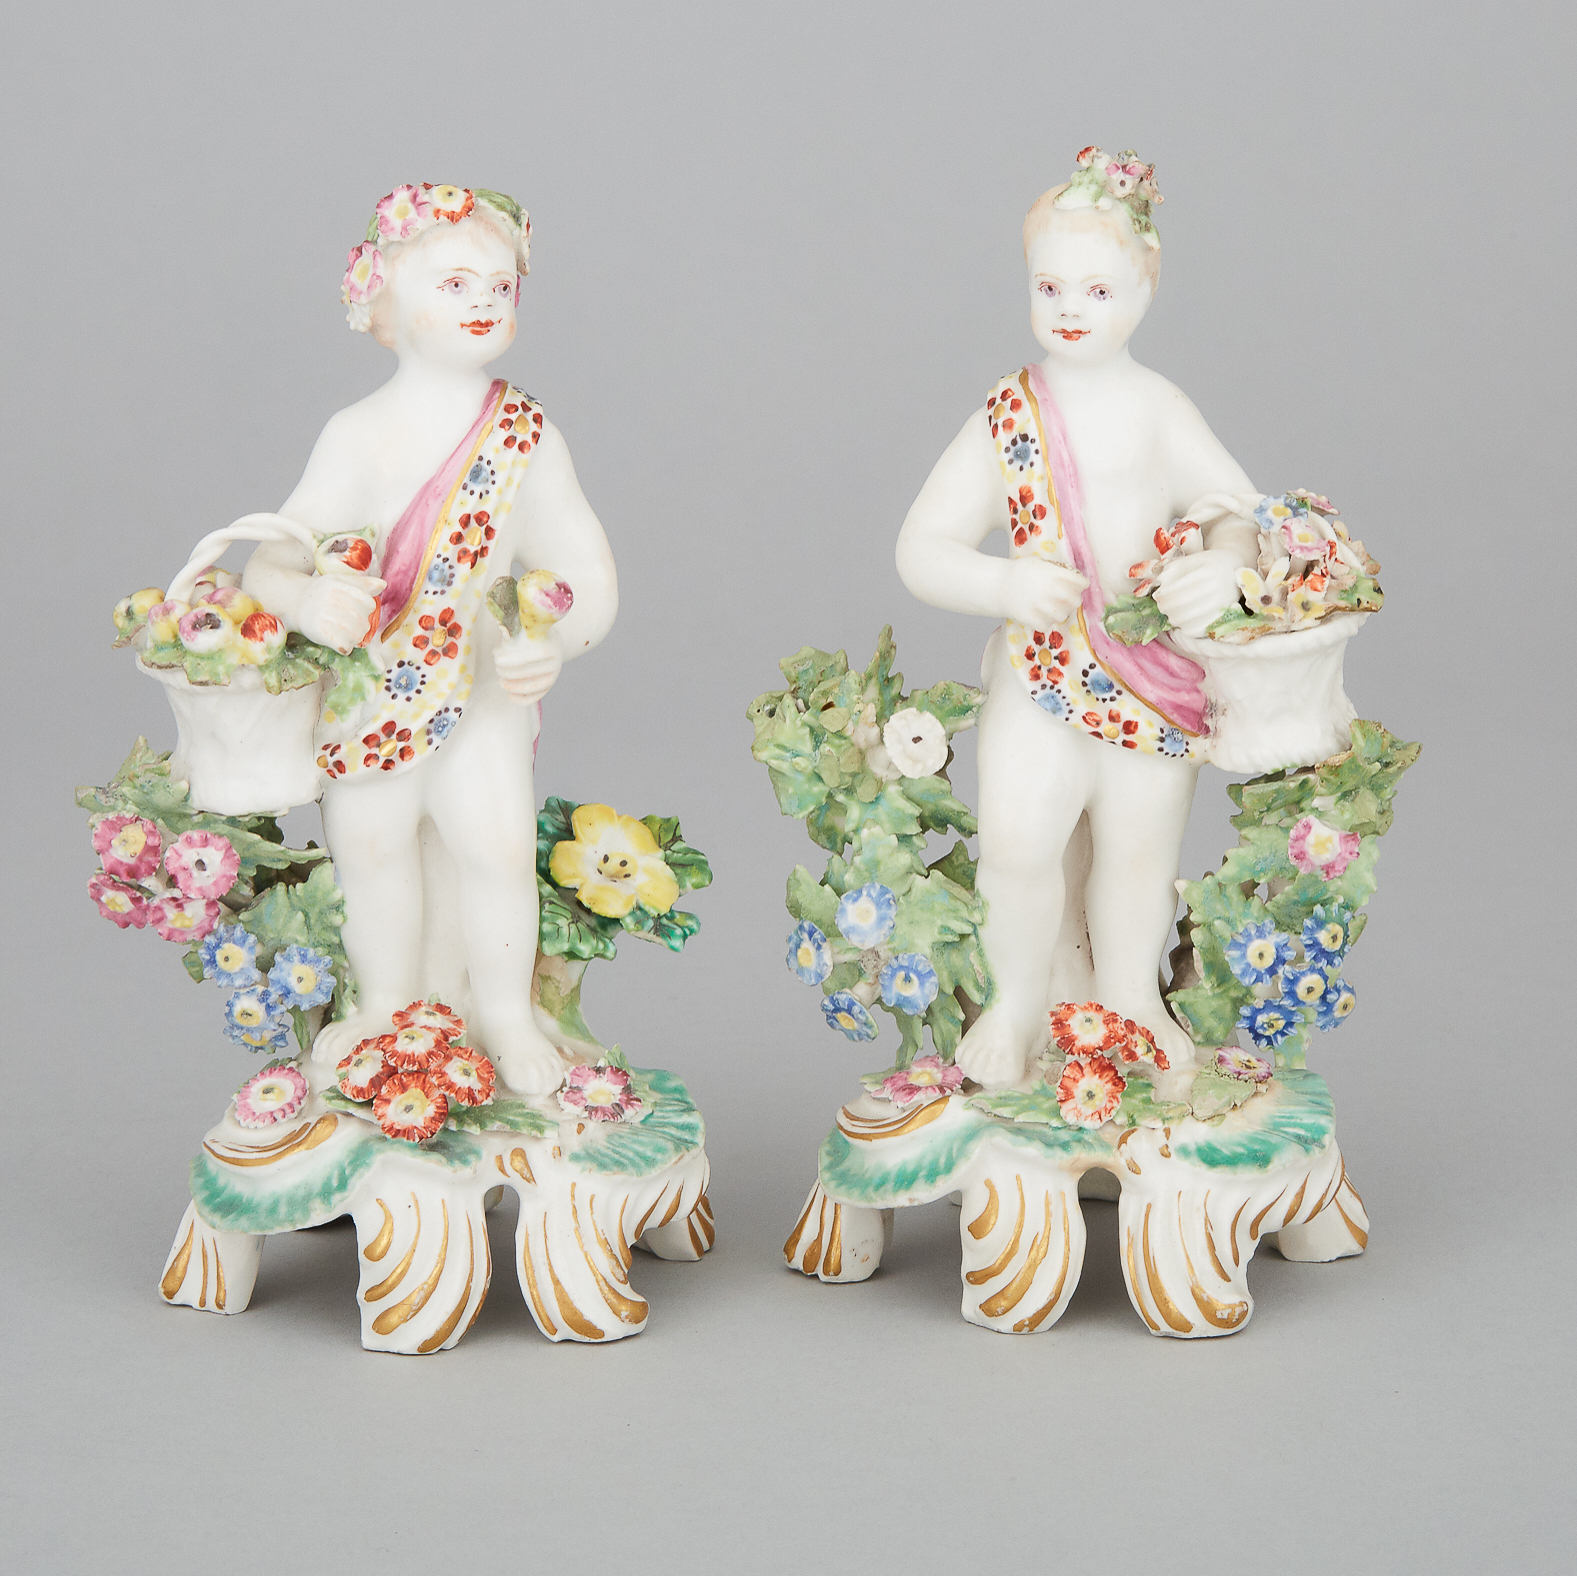 Pair of Bow Figures of Putti, c.1765